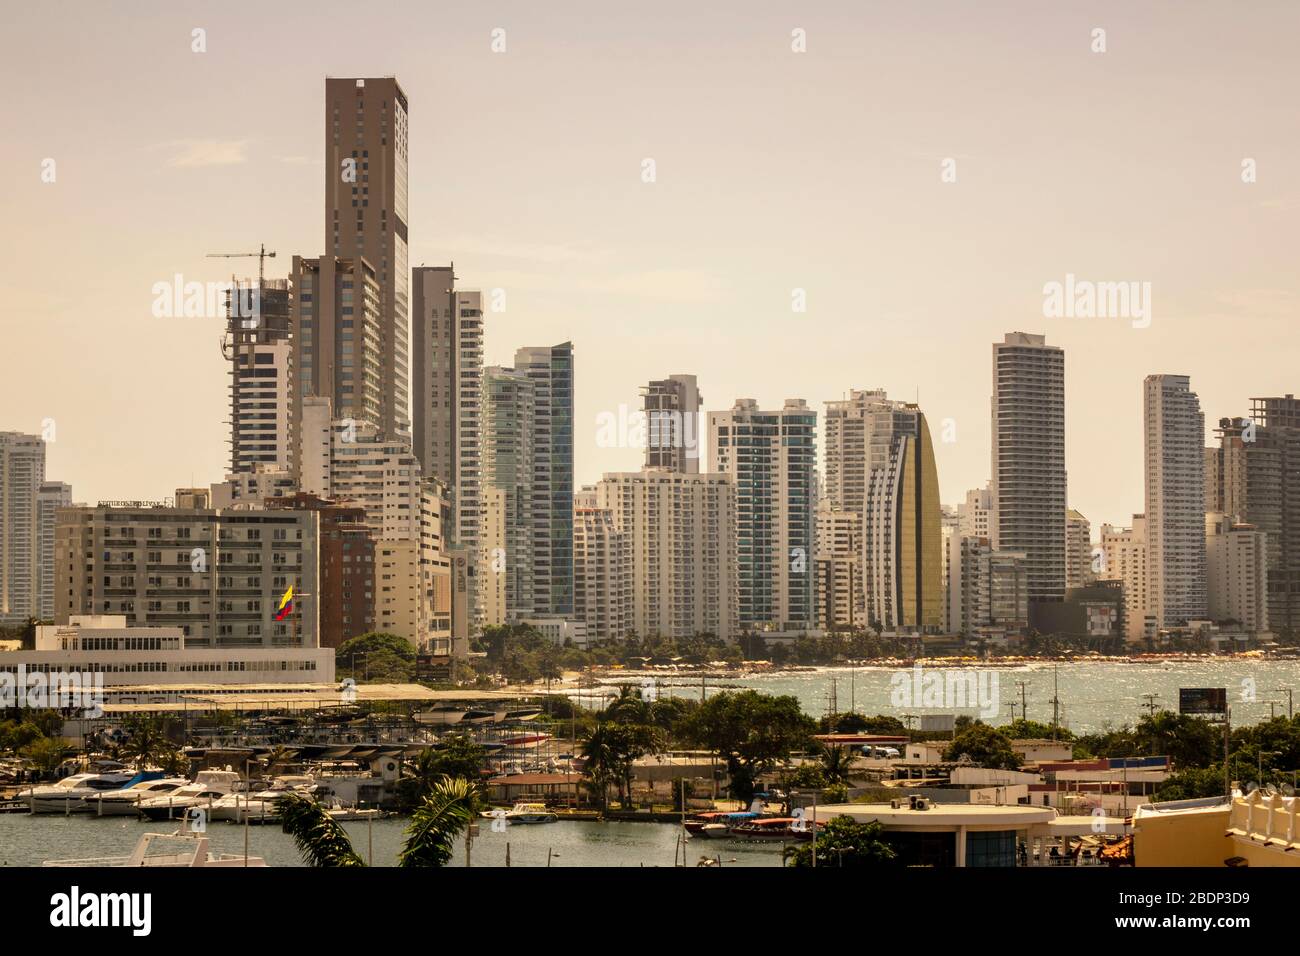 Cartagena, Colombia - January 23, 2020: The Skyline of the new city of Cartagena in Colombia Stock Photo